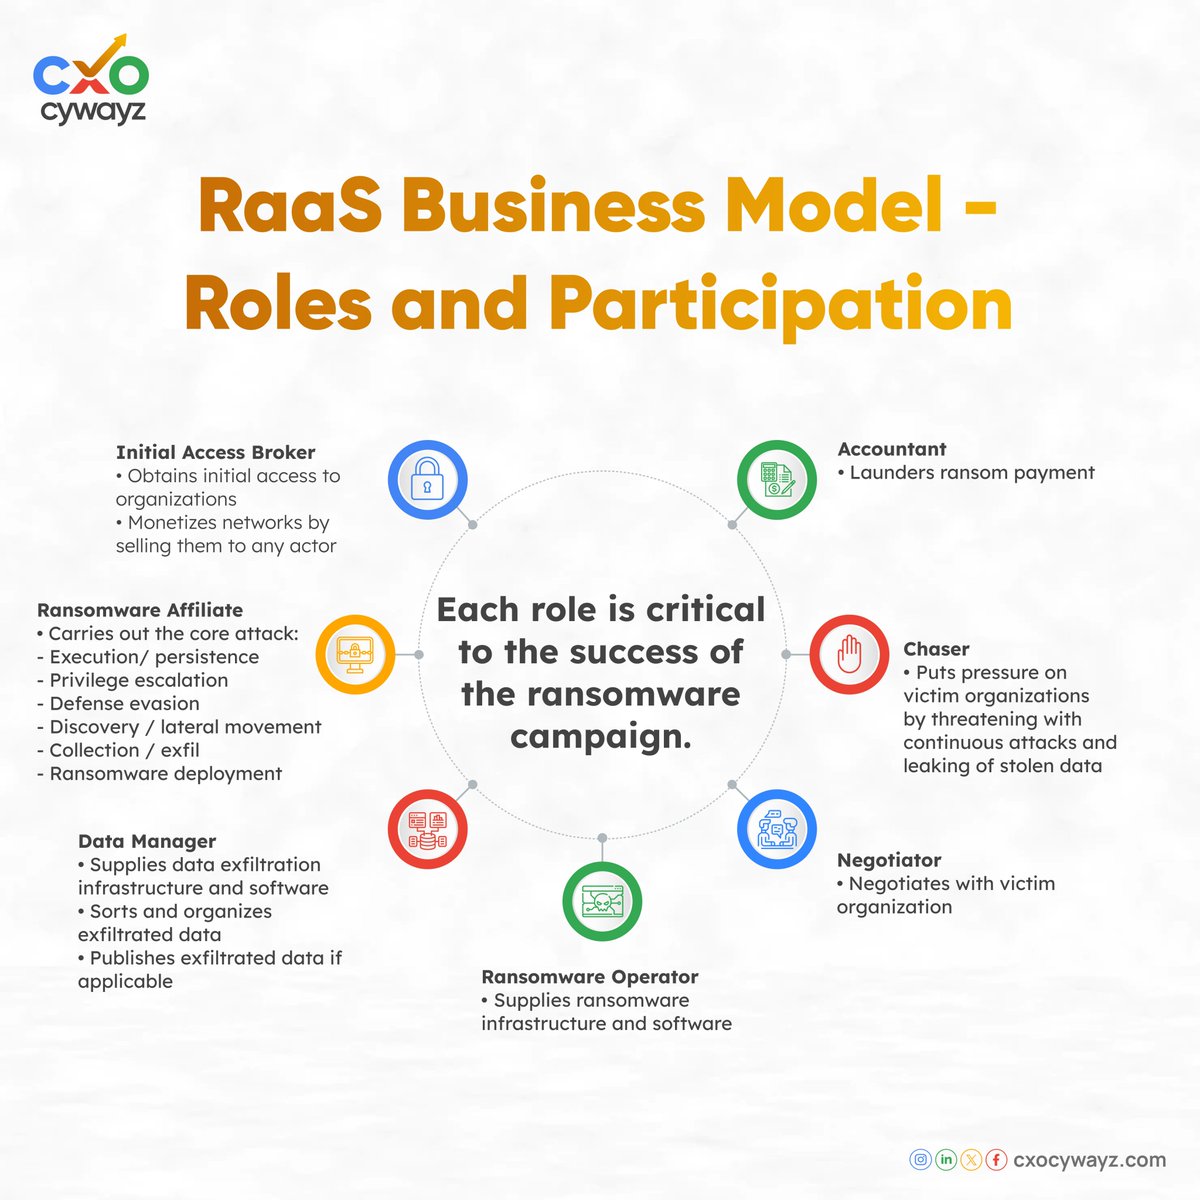 RaaS Business Model- Roles and Participation

#Ransomware #CXOCywayz #cybersecurity #Empowering #Business